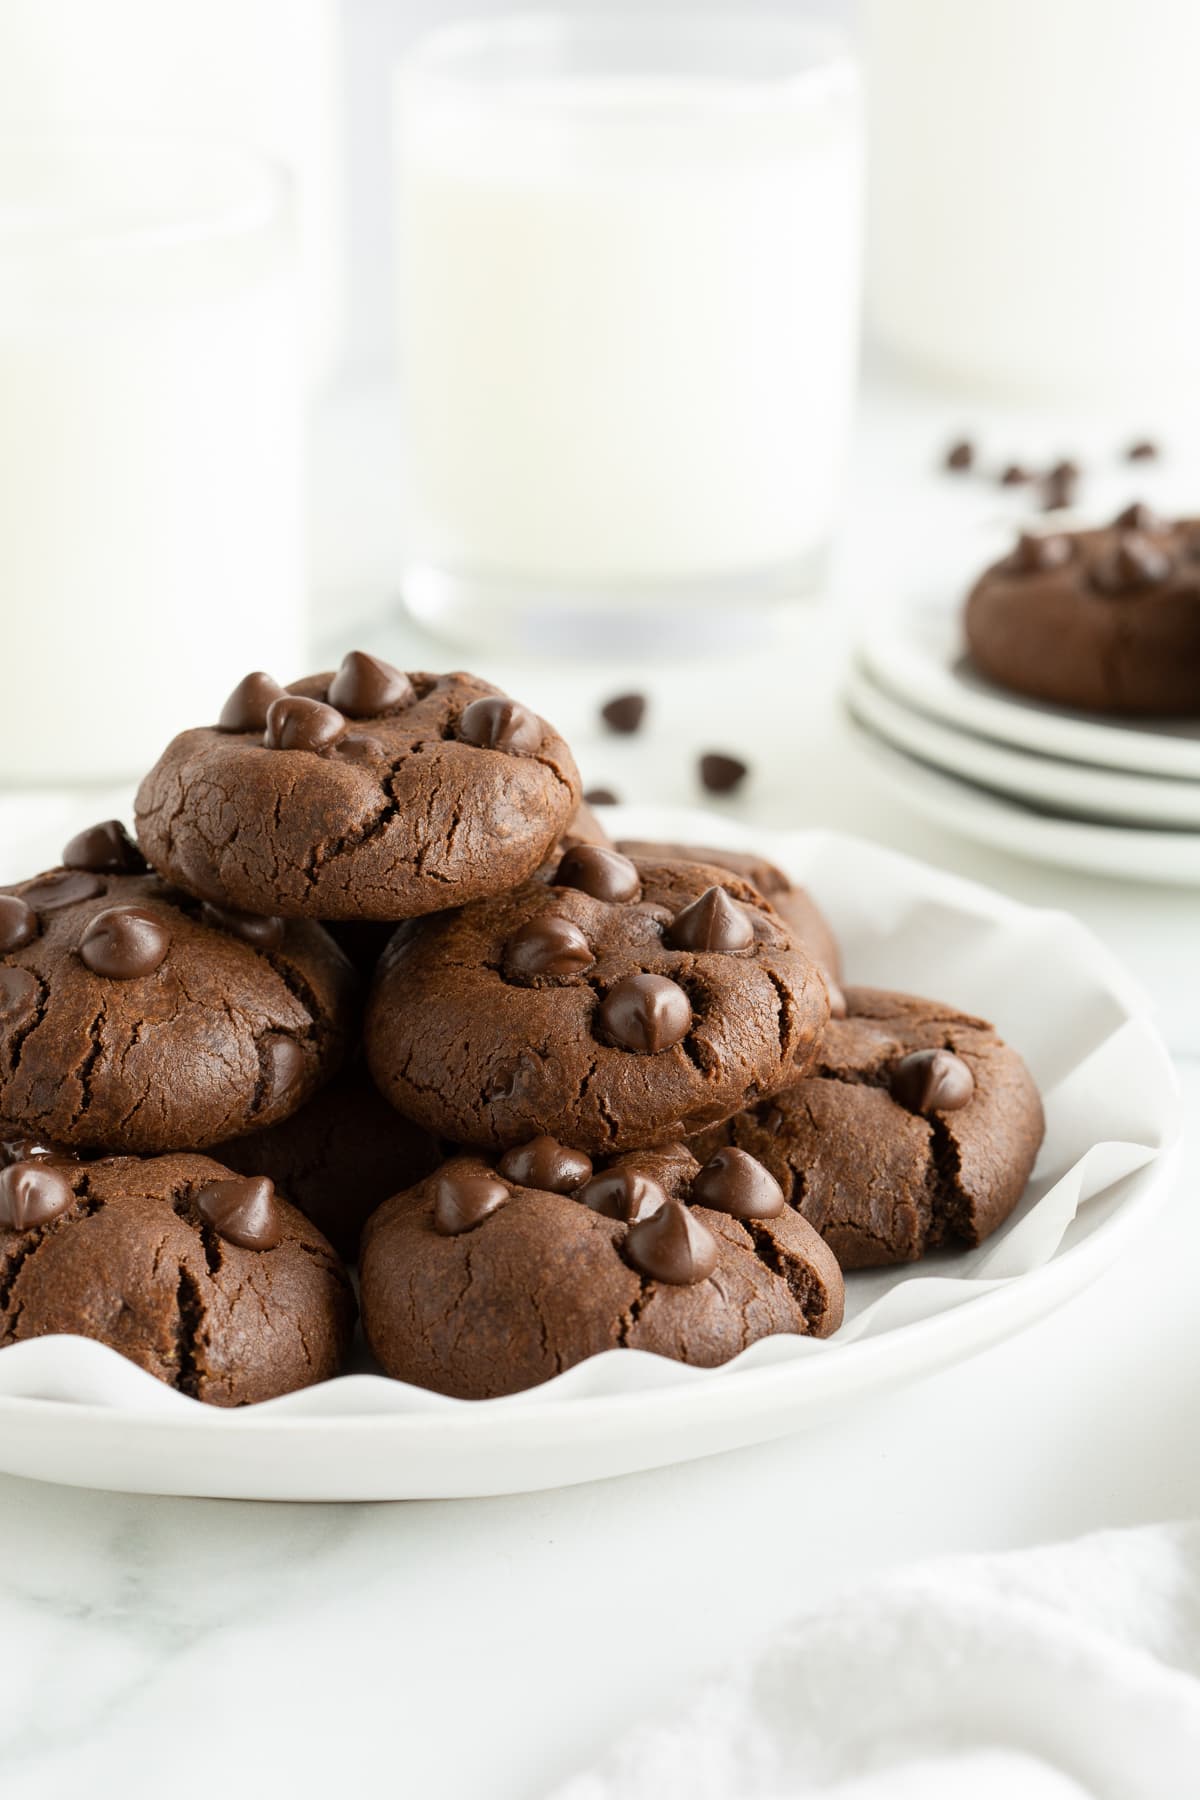 A stack of chocolate cookies with chocolate chips on a white plate.